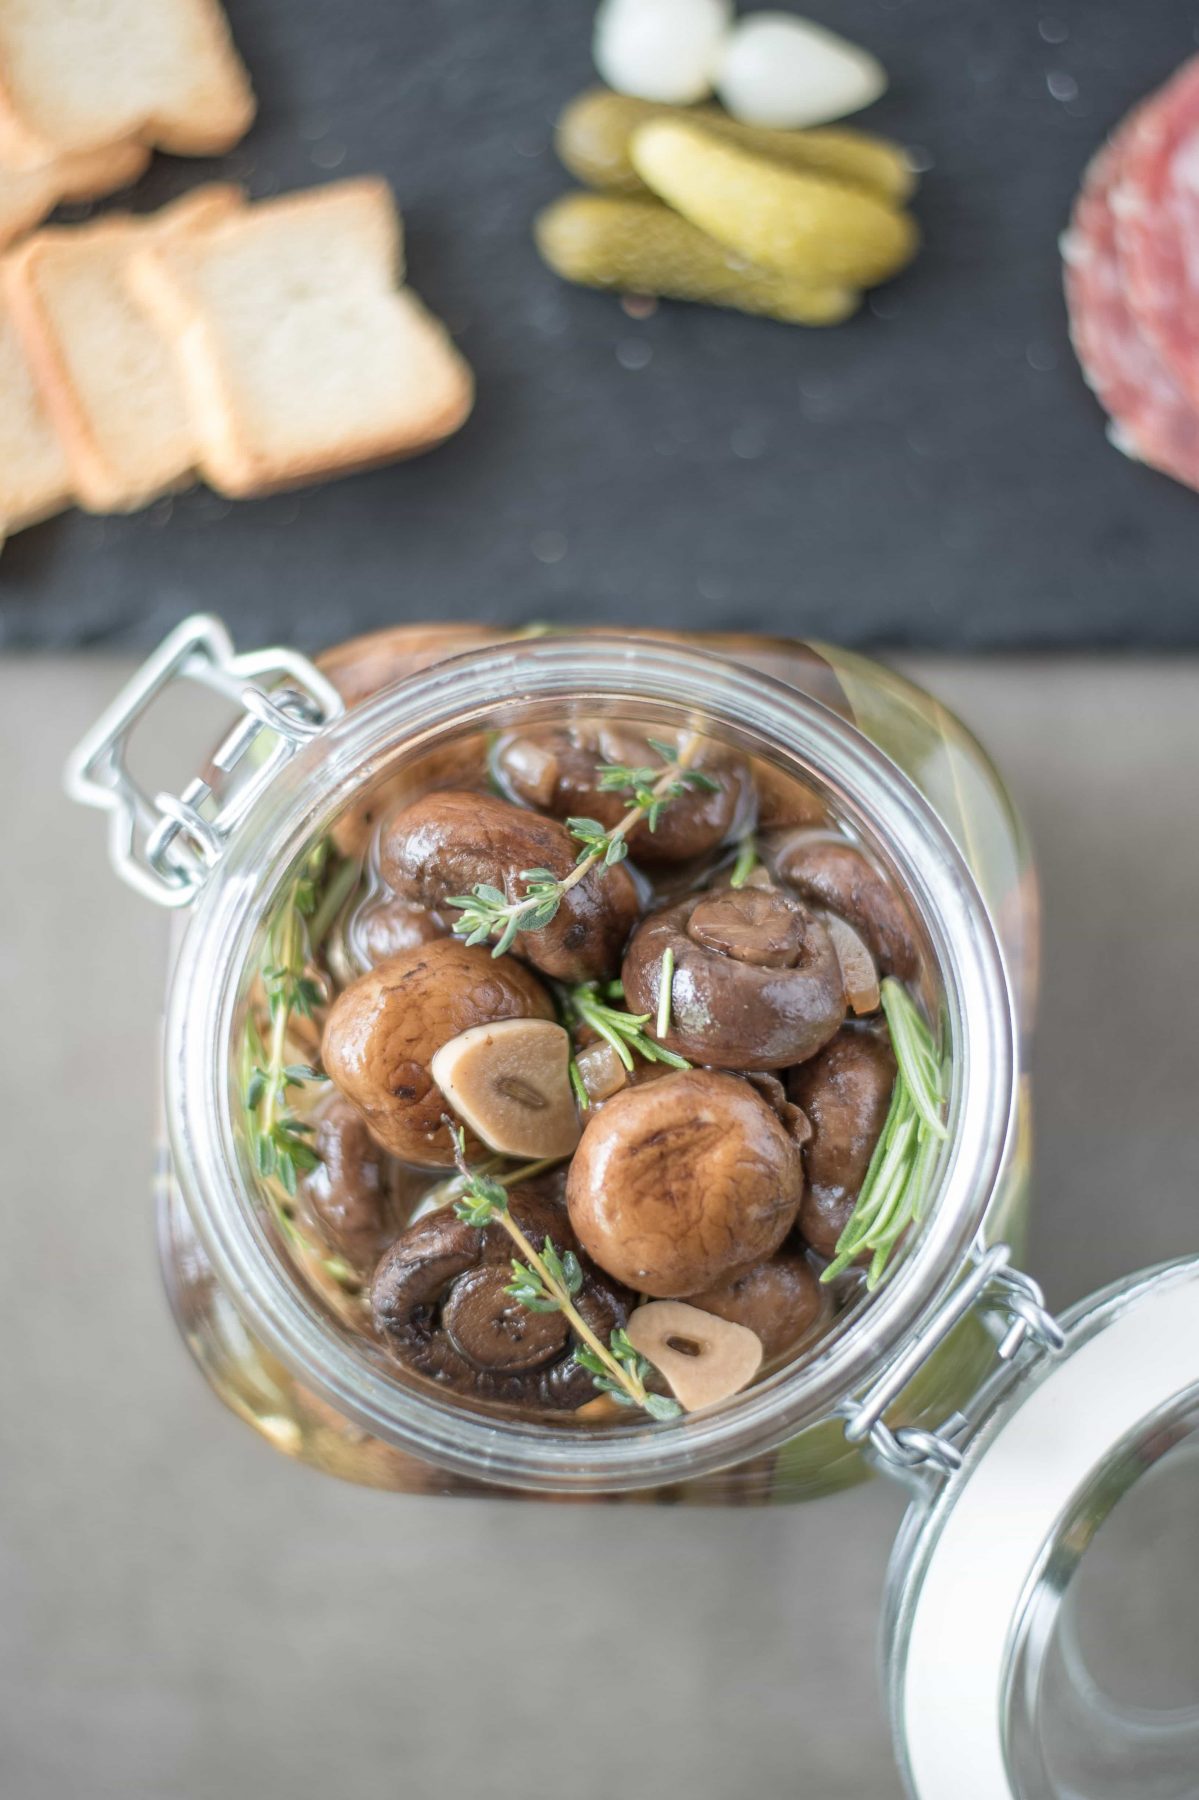 Charcuterie Board Must-Have: Herb and Garlic Marinated Mushrooms